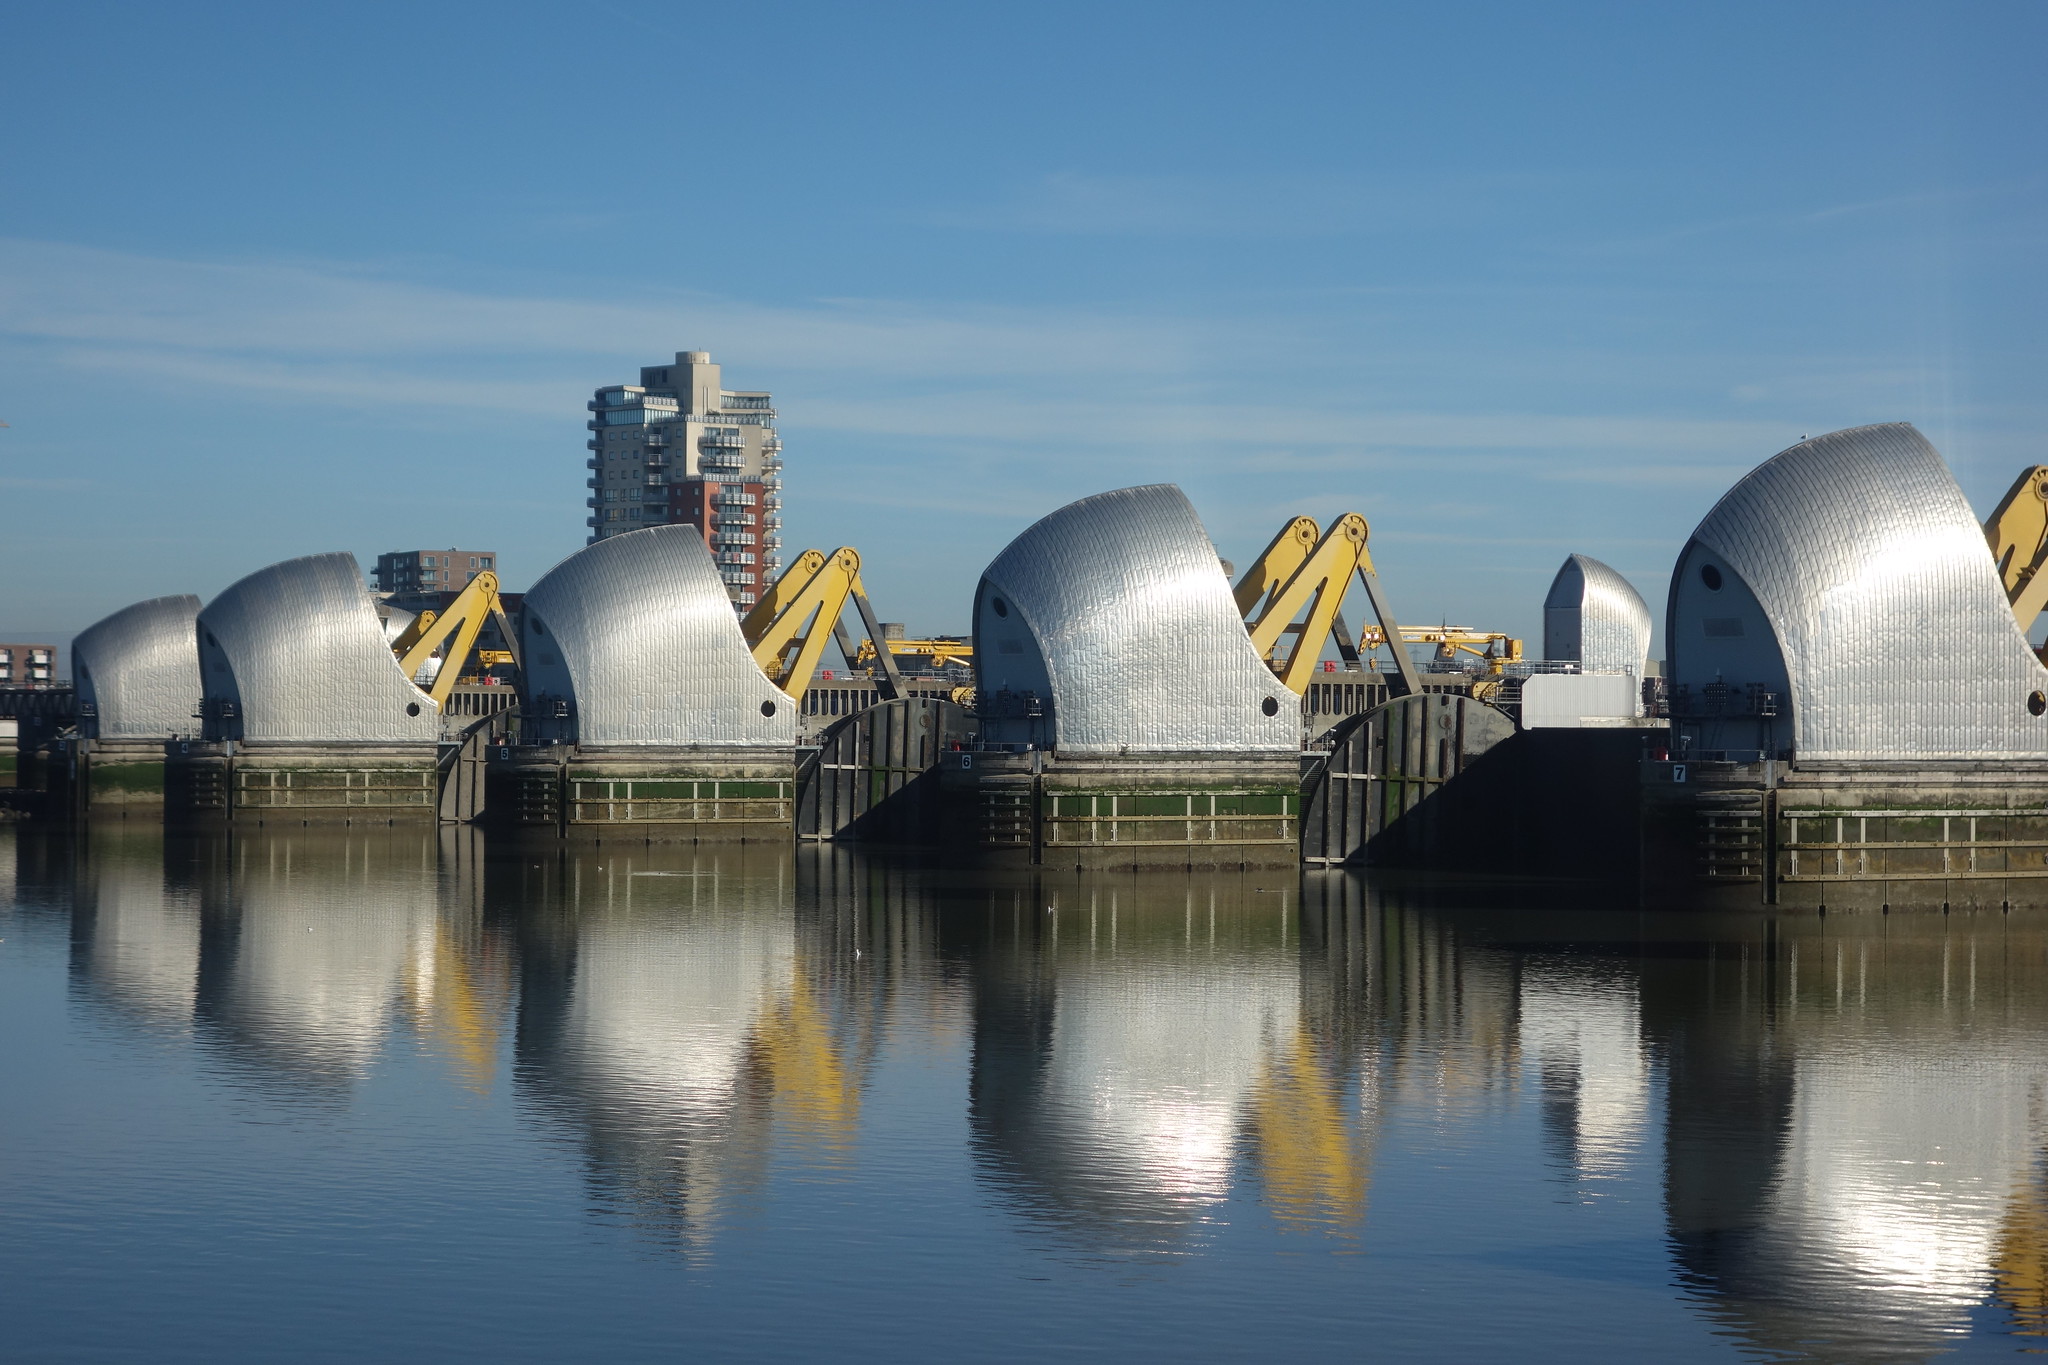 The Thames barrier closure 8.15am Sunday 6 October 2013(by Chris Wheal CC BY 2.0 via Flickr).